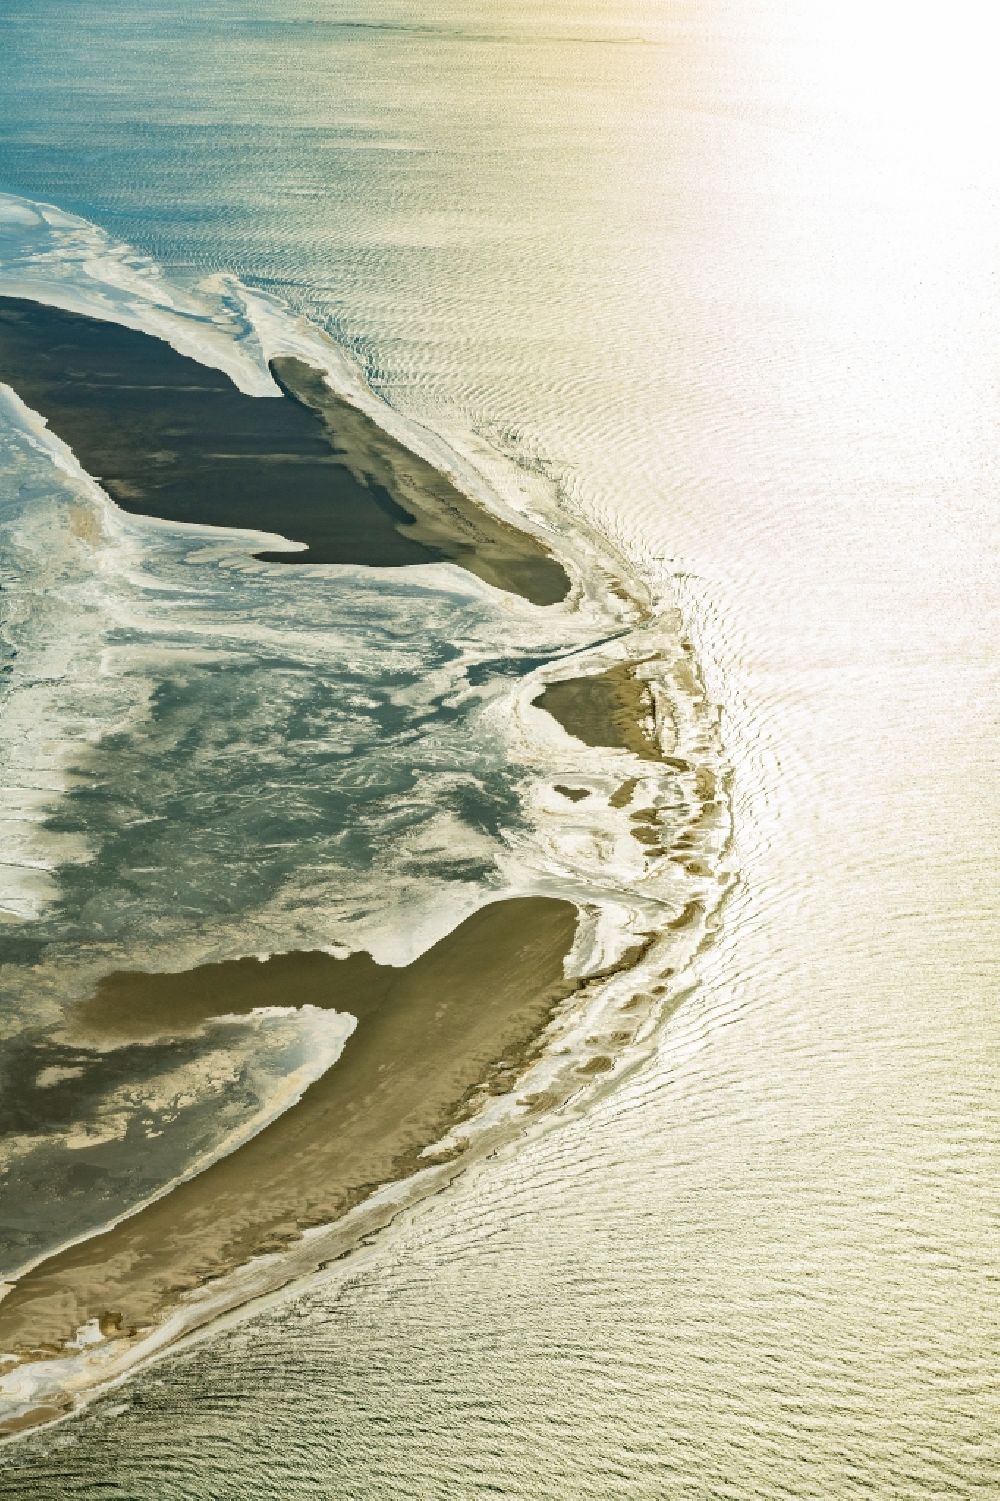 Nigehörn from the bird's eye view: Wintry snowy coastal area of a??a??the North Sea island in Scharhoern Nigehoern outer reef sand banks in the state of Hamburg